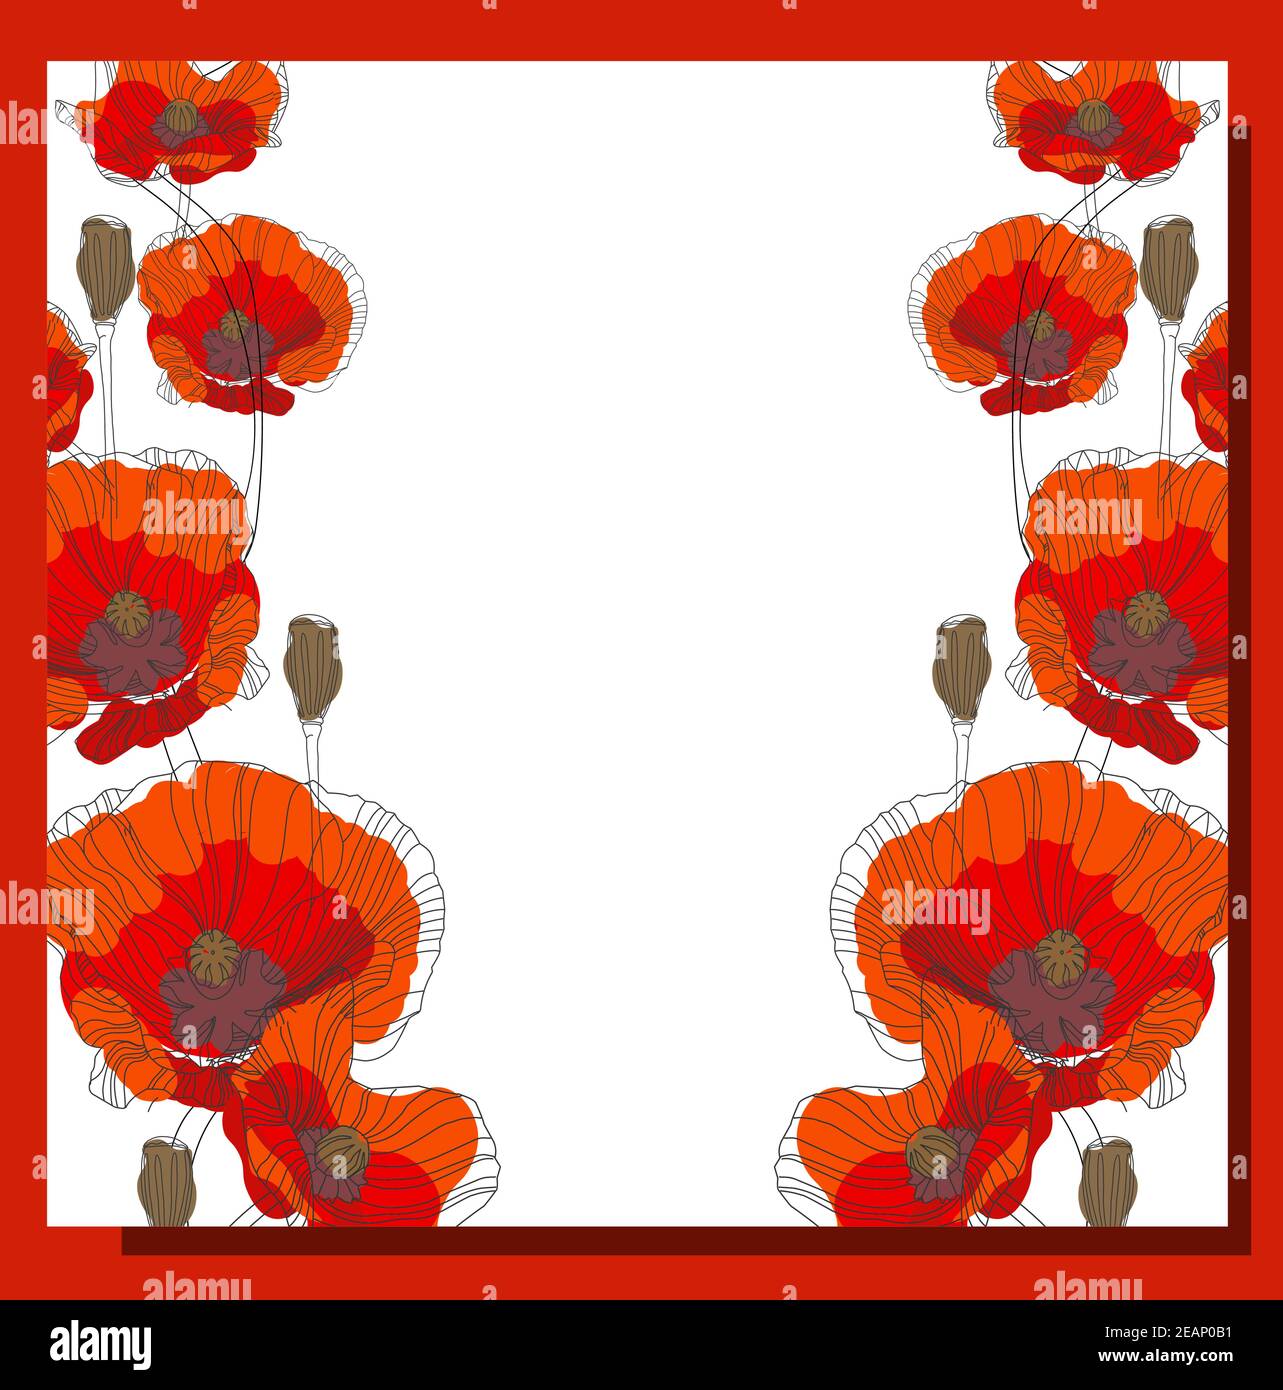 May 9. Banner for Victory Day. Symbolic red poppy on a white background. Vector illustration. Victory day poster. Poppy flower symbol of memory. Secon Stock Vector